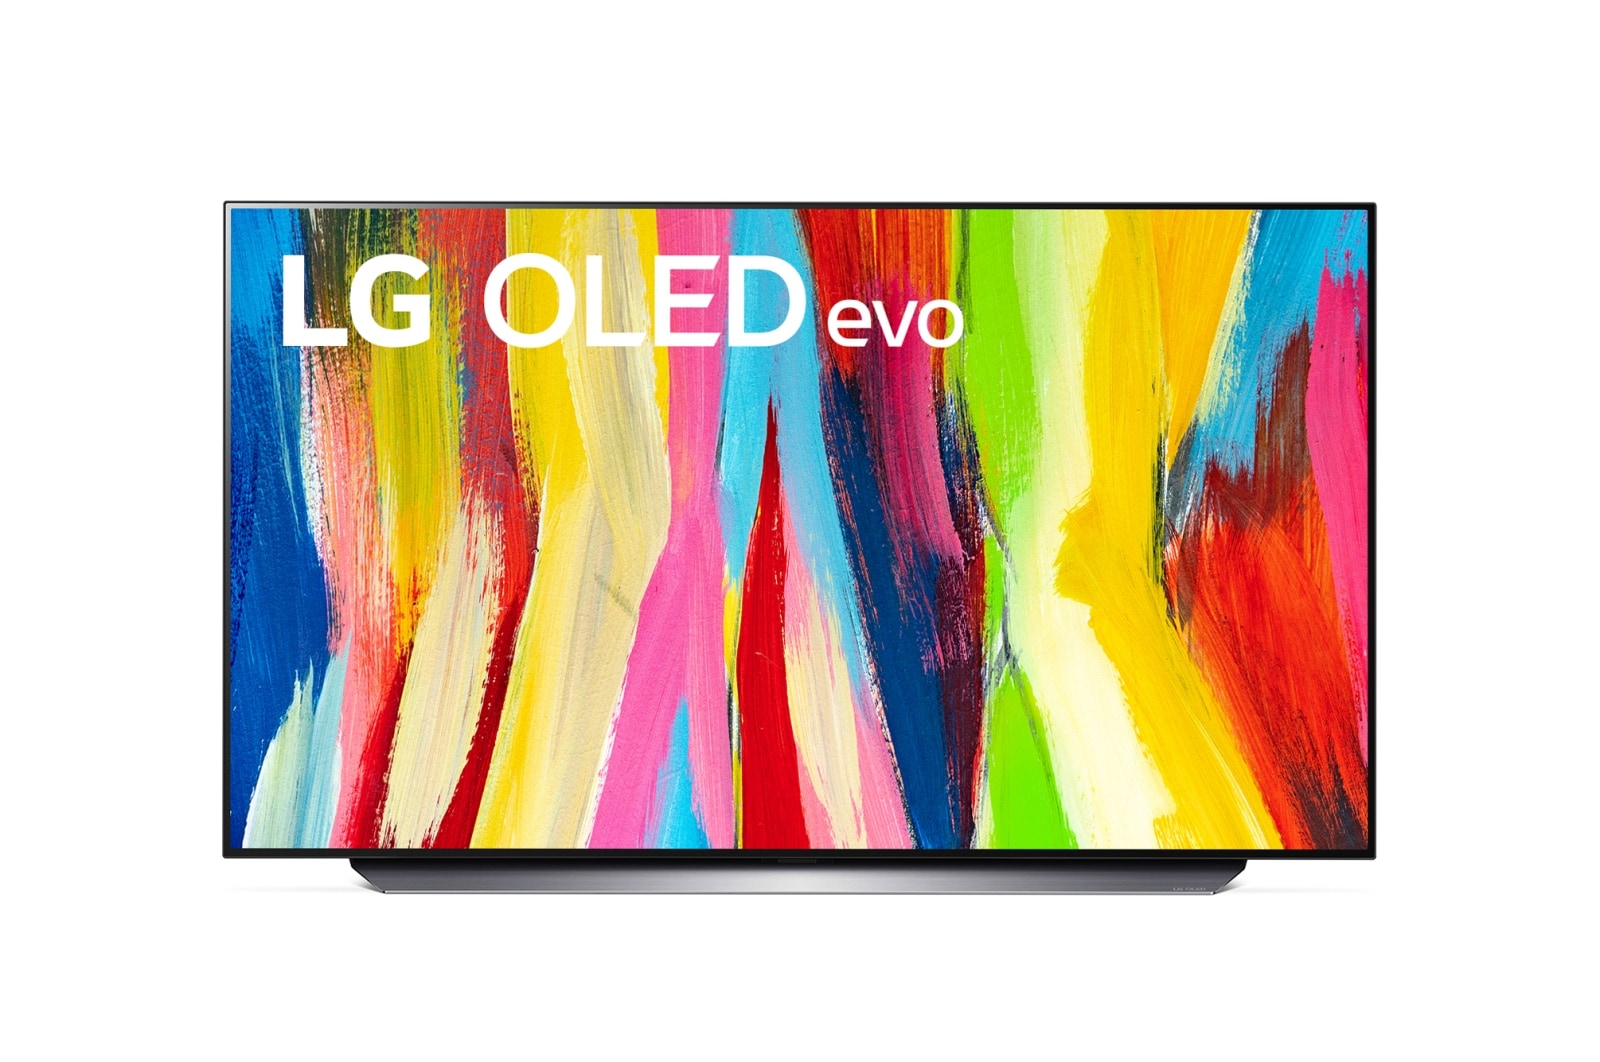 Switching to a 42-inch LG C2 OLED TV as a Monitor! 